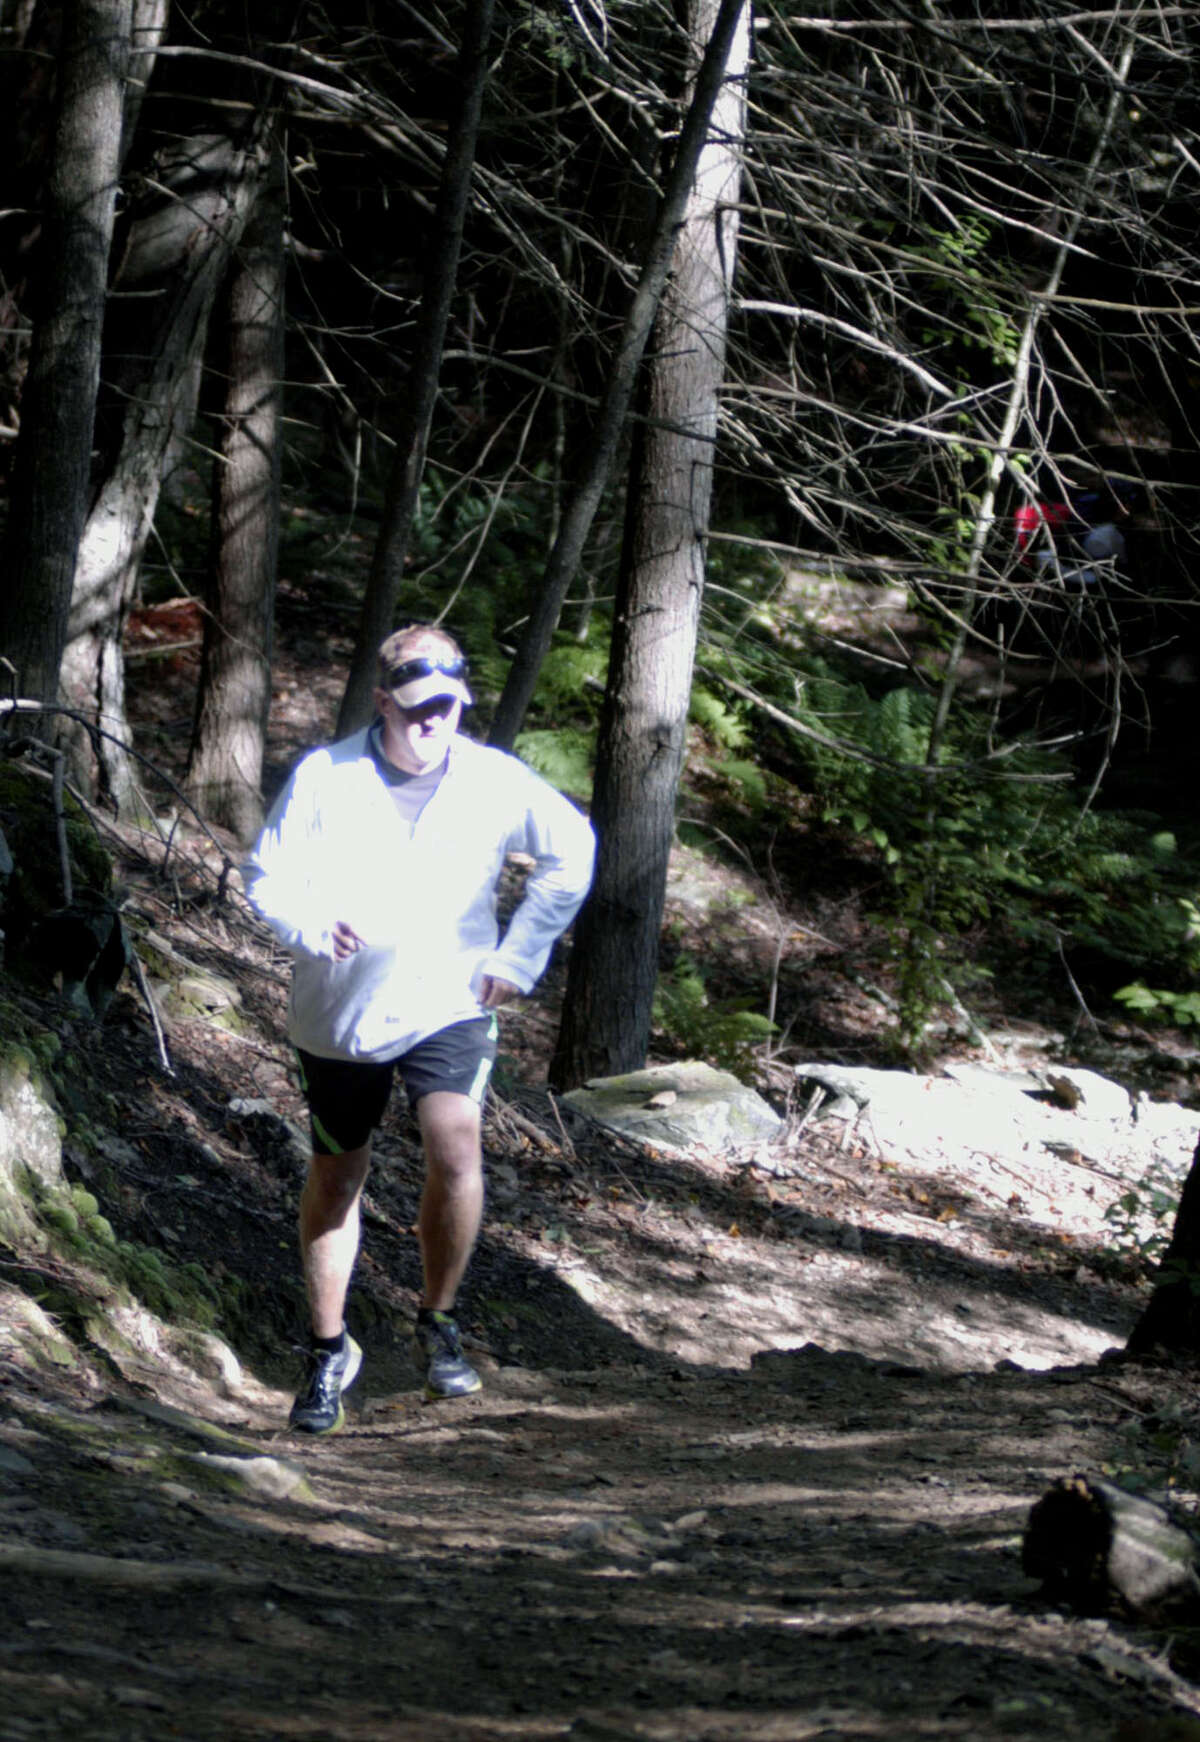 After spending hours prepping a Steep Rock Reservation trail for his runners, New Milford High School girls' cross country coach Giles Vaughan gives it a test run before sending his Green Wave athletes on a rigorous workout in Washington. September 2013